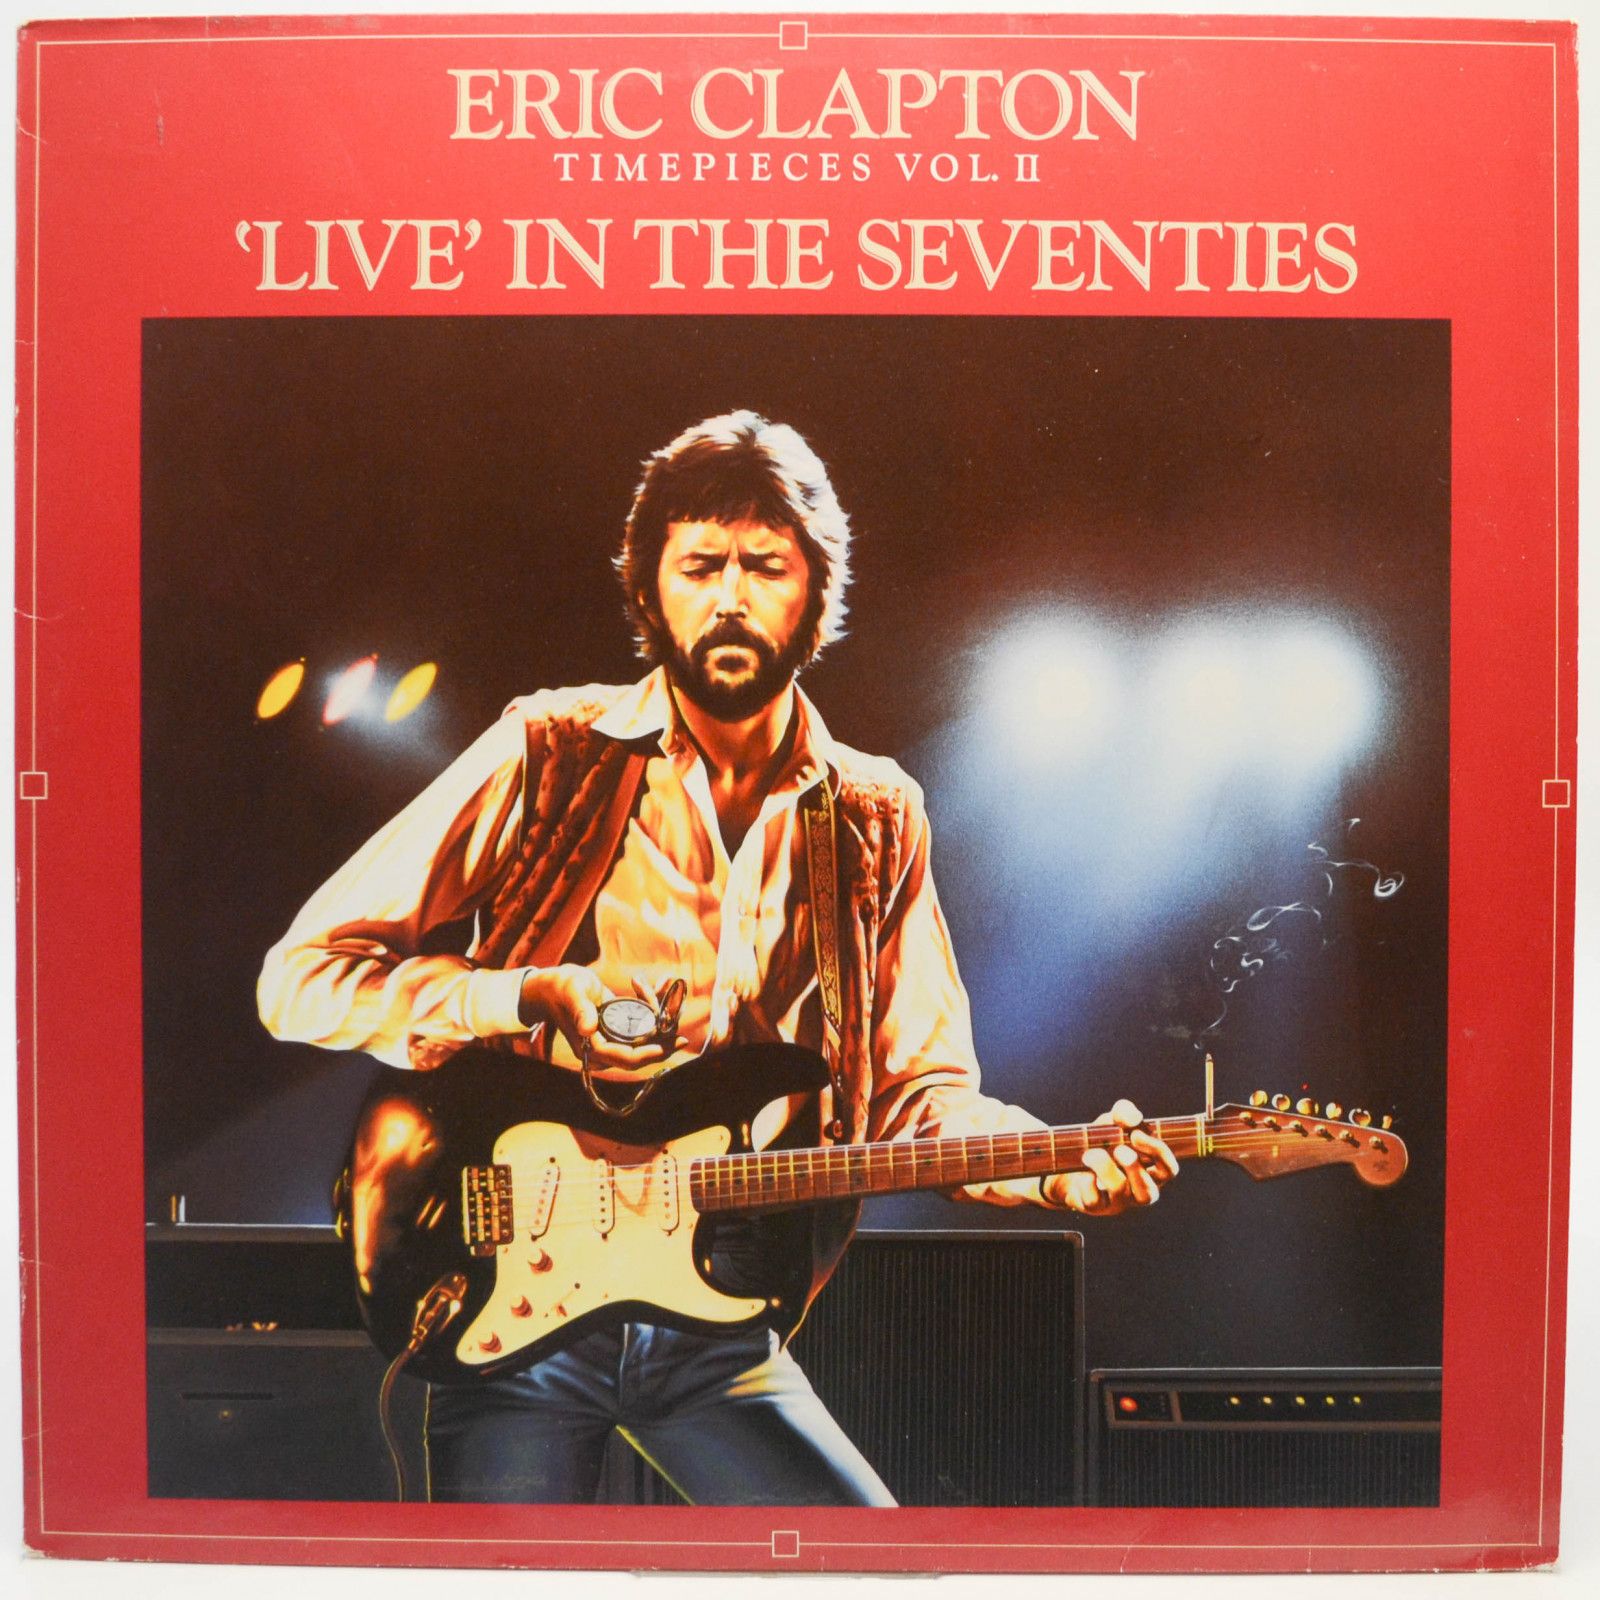 Eric Clapton — Timepieces Vol. II - 'Live' In The Seventies, 1983